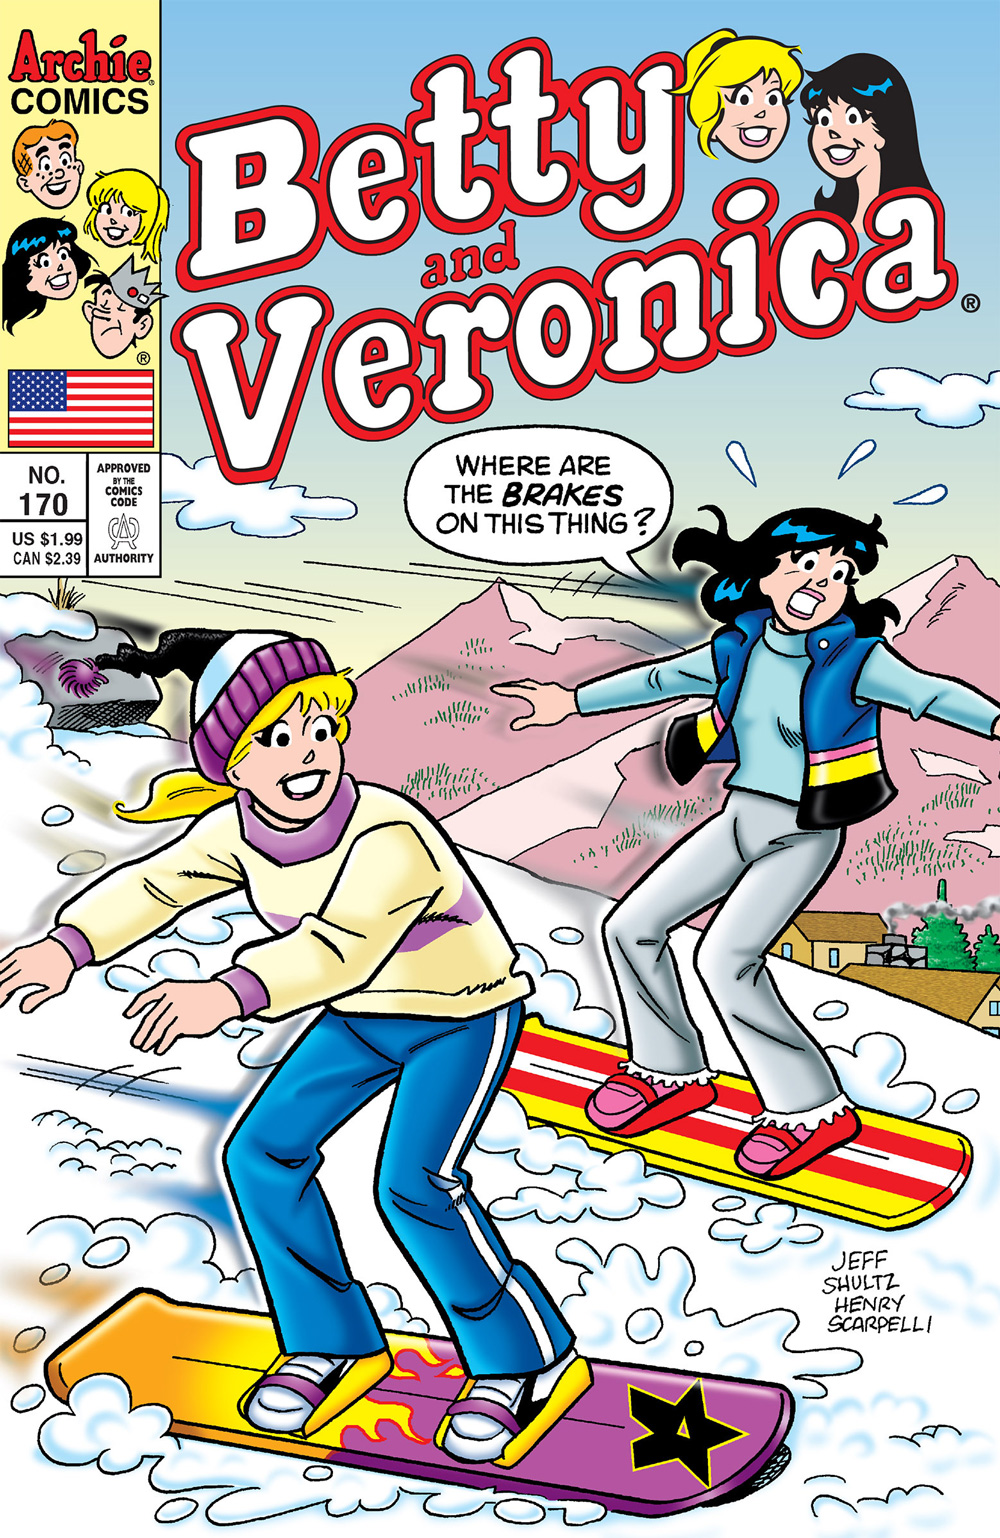 Betty and Veronica snowboard down a snowy mountain slope. Veronica asks where the brakes are on this thing.